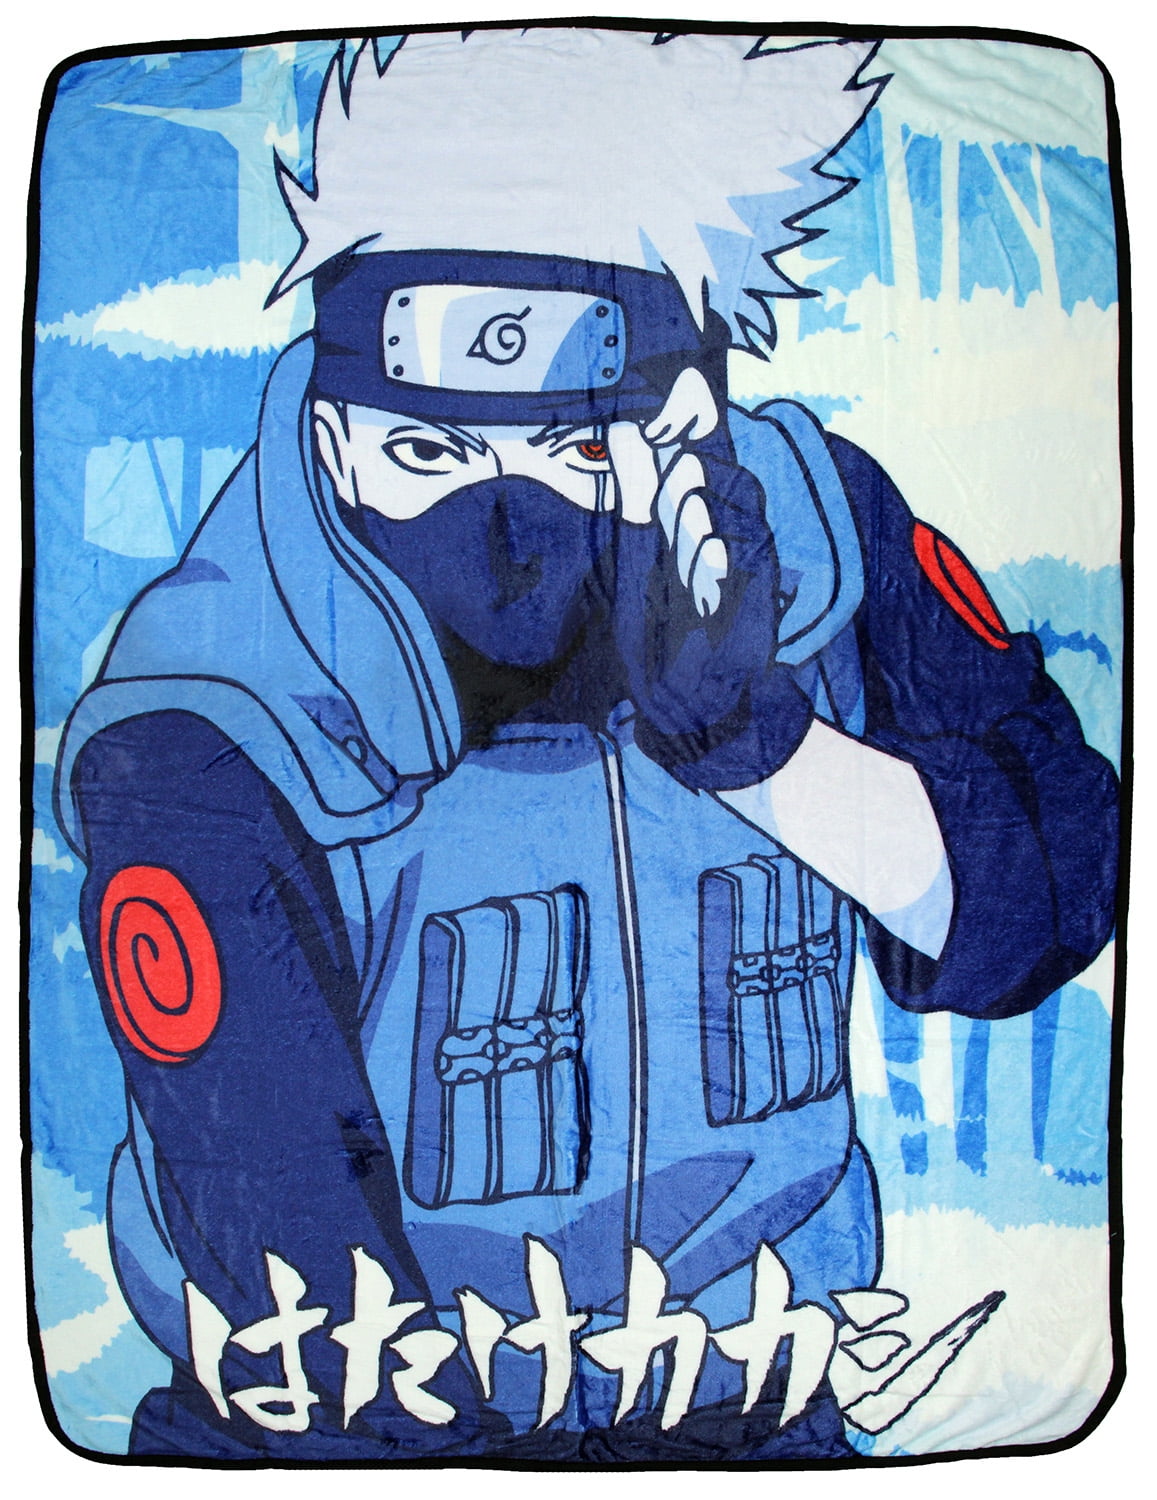 Nsddm Naruto Series/Hatake Kakashi with A Group of Dogs Pattern/Anime Blanket/Home Furnishings/Bedding/Soft and Comfortable/Easy to Clean/A Quilt Suitable for Adults and Children